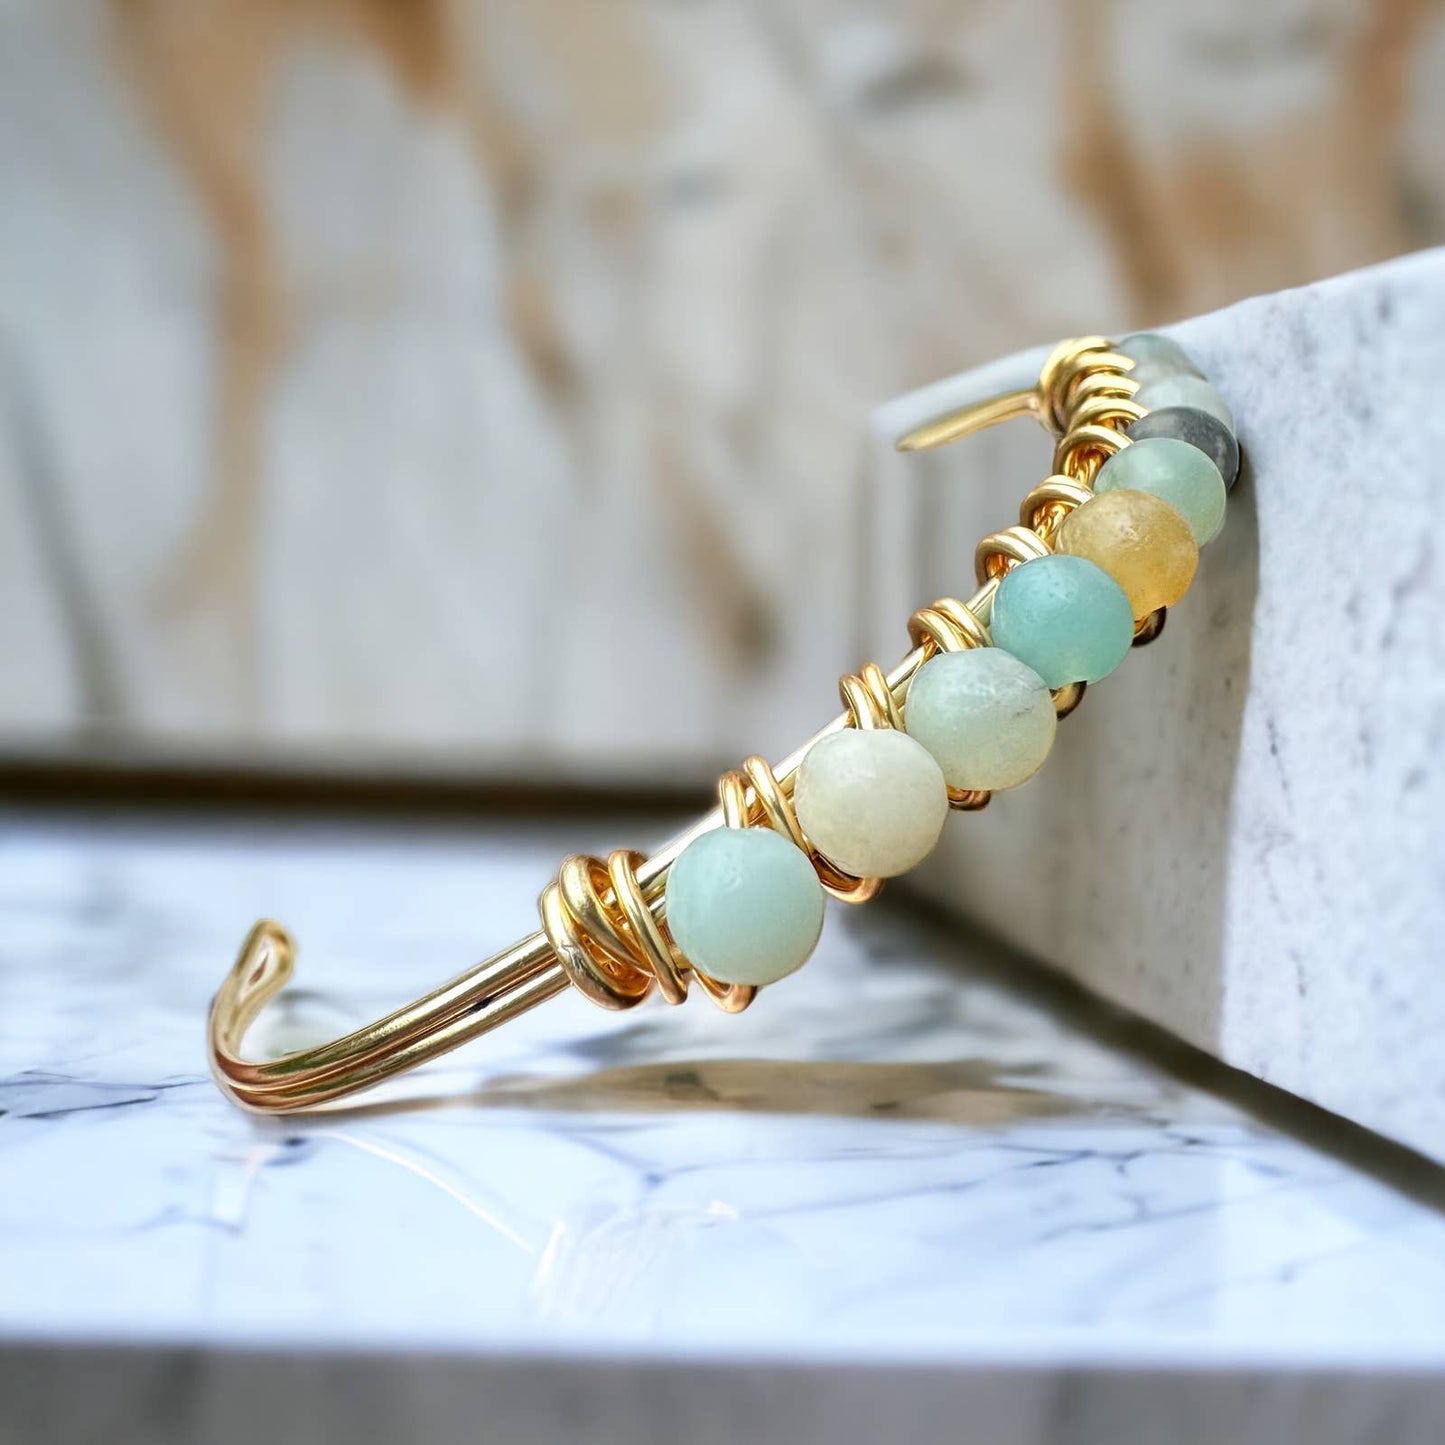 Handcrafted Amazonite Bangle - Small Adjustable Size, Hypoallergenic